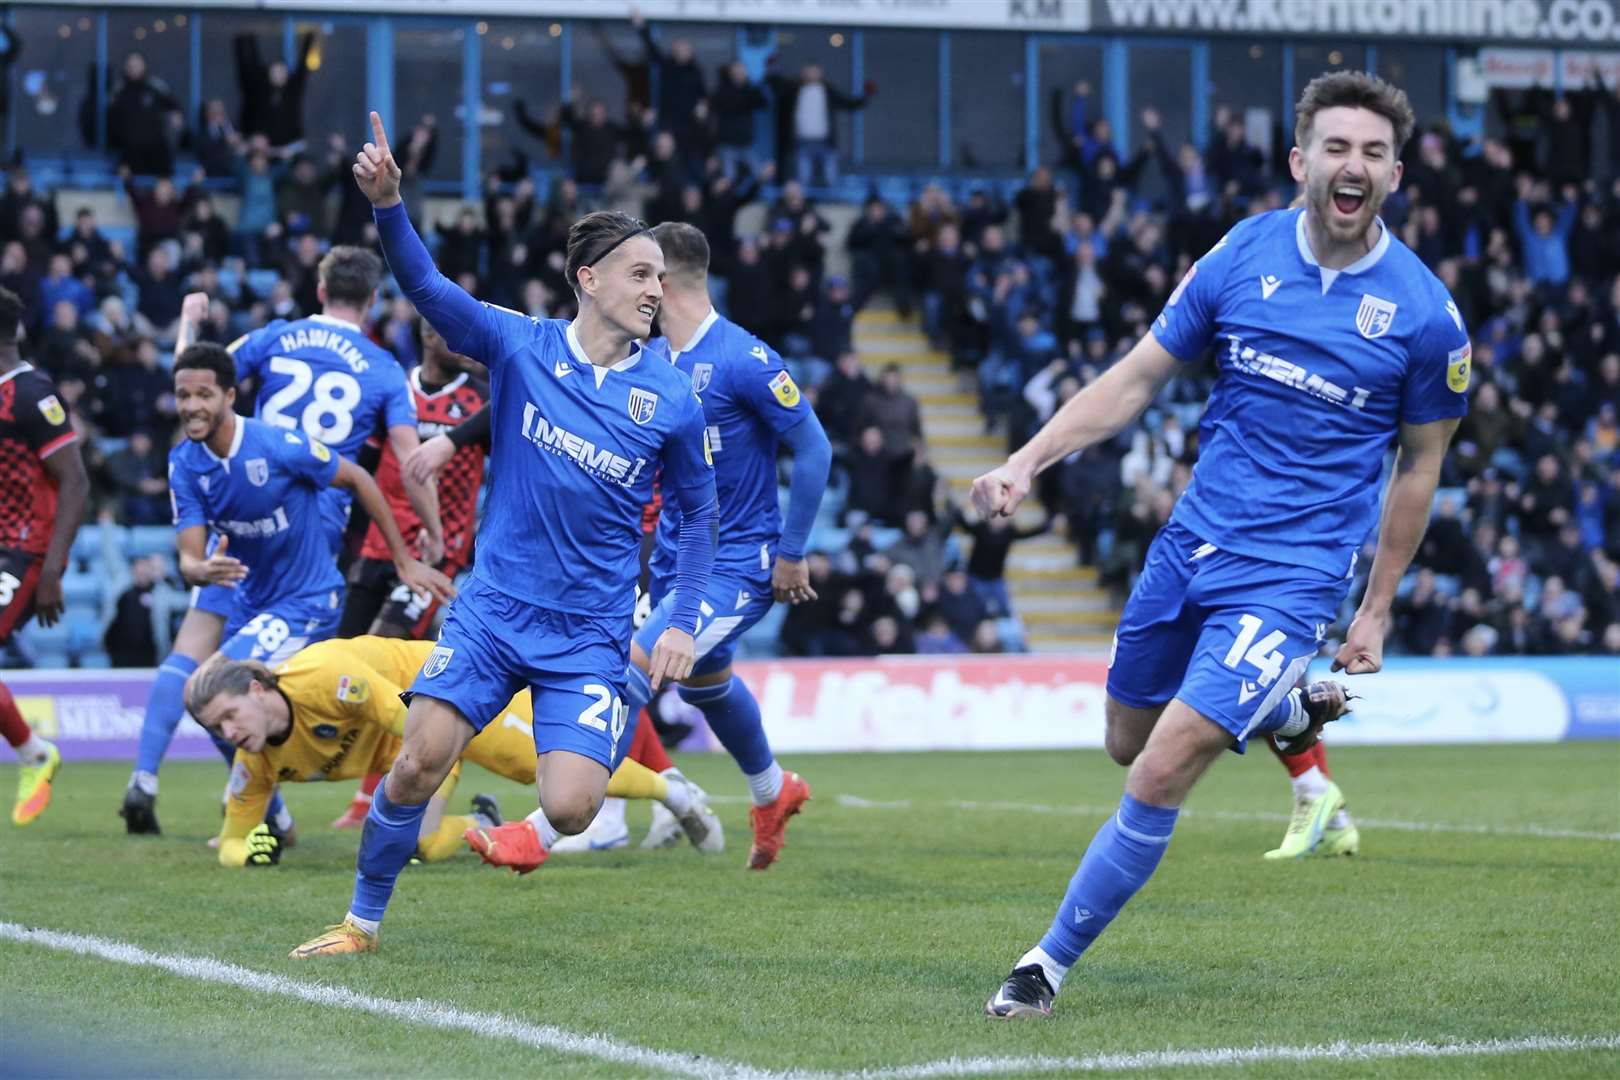 Tom Nichols opened his account for Gillingham against Hartlepool United